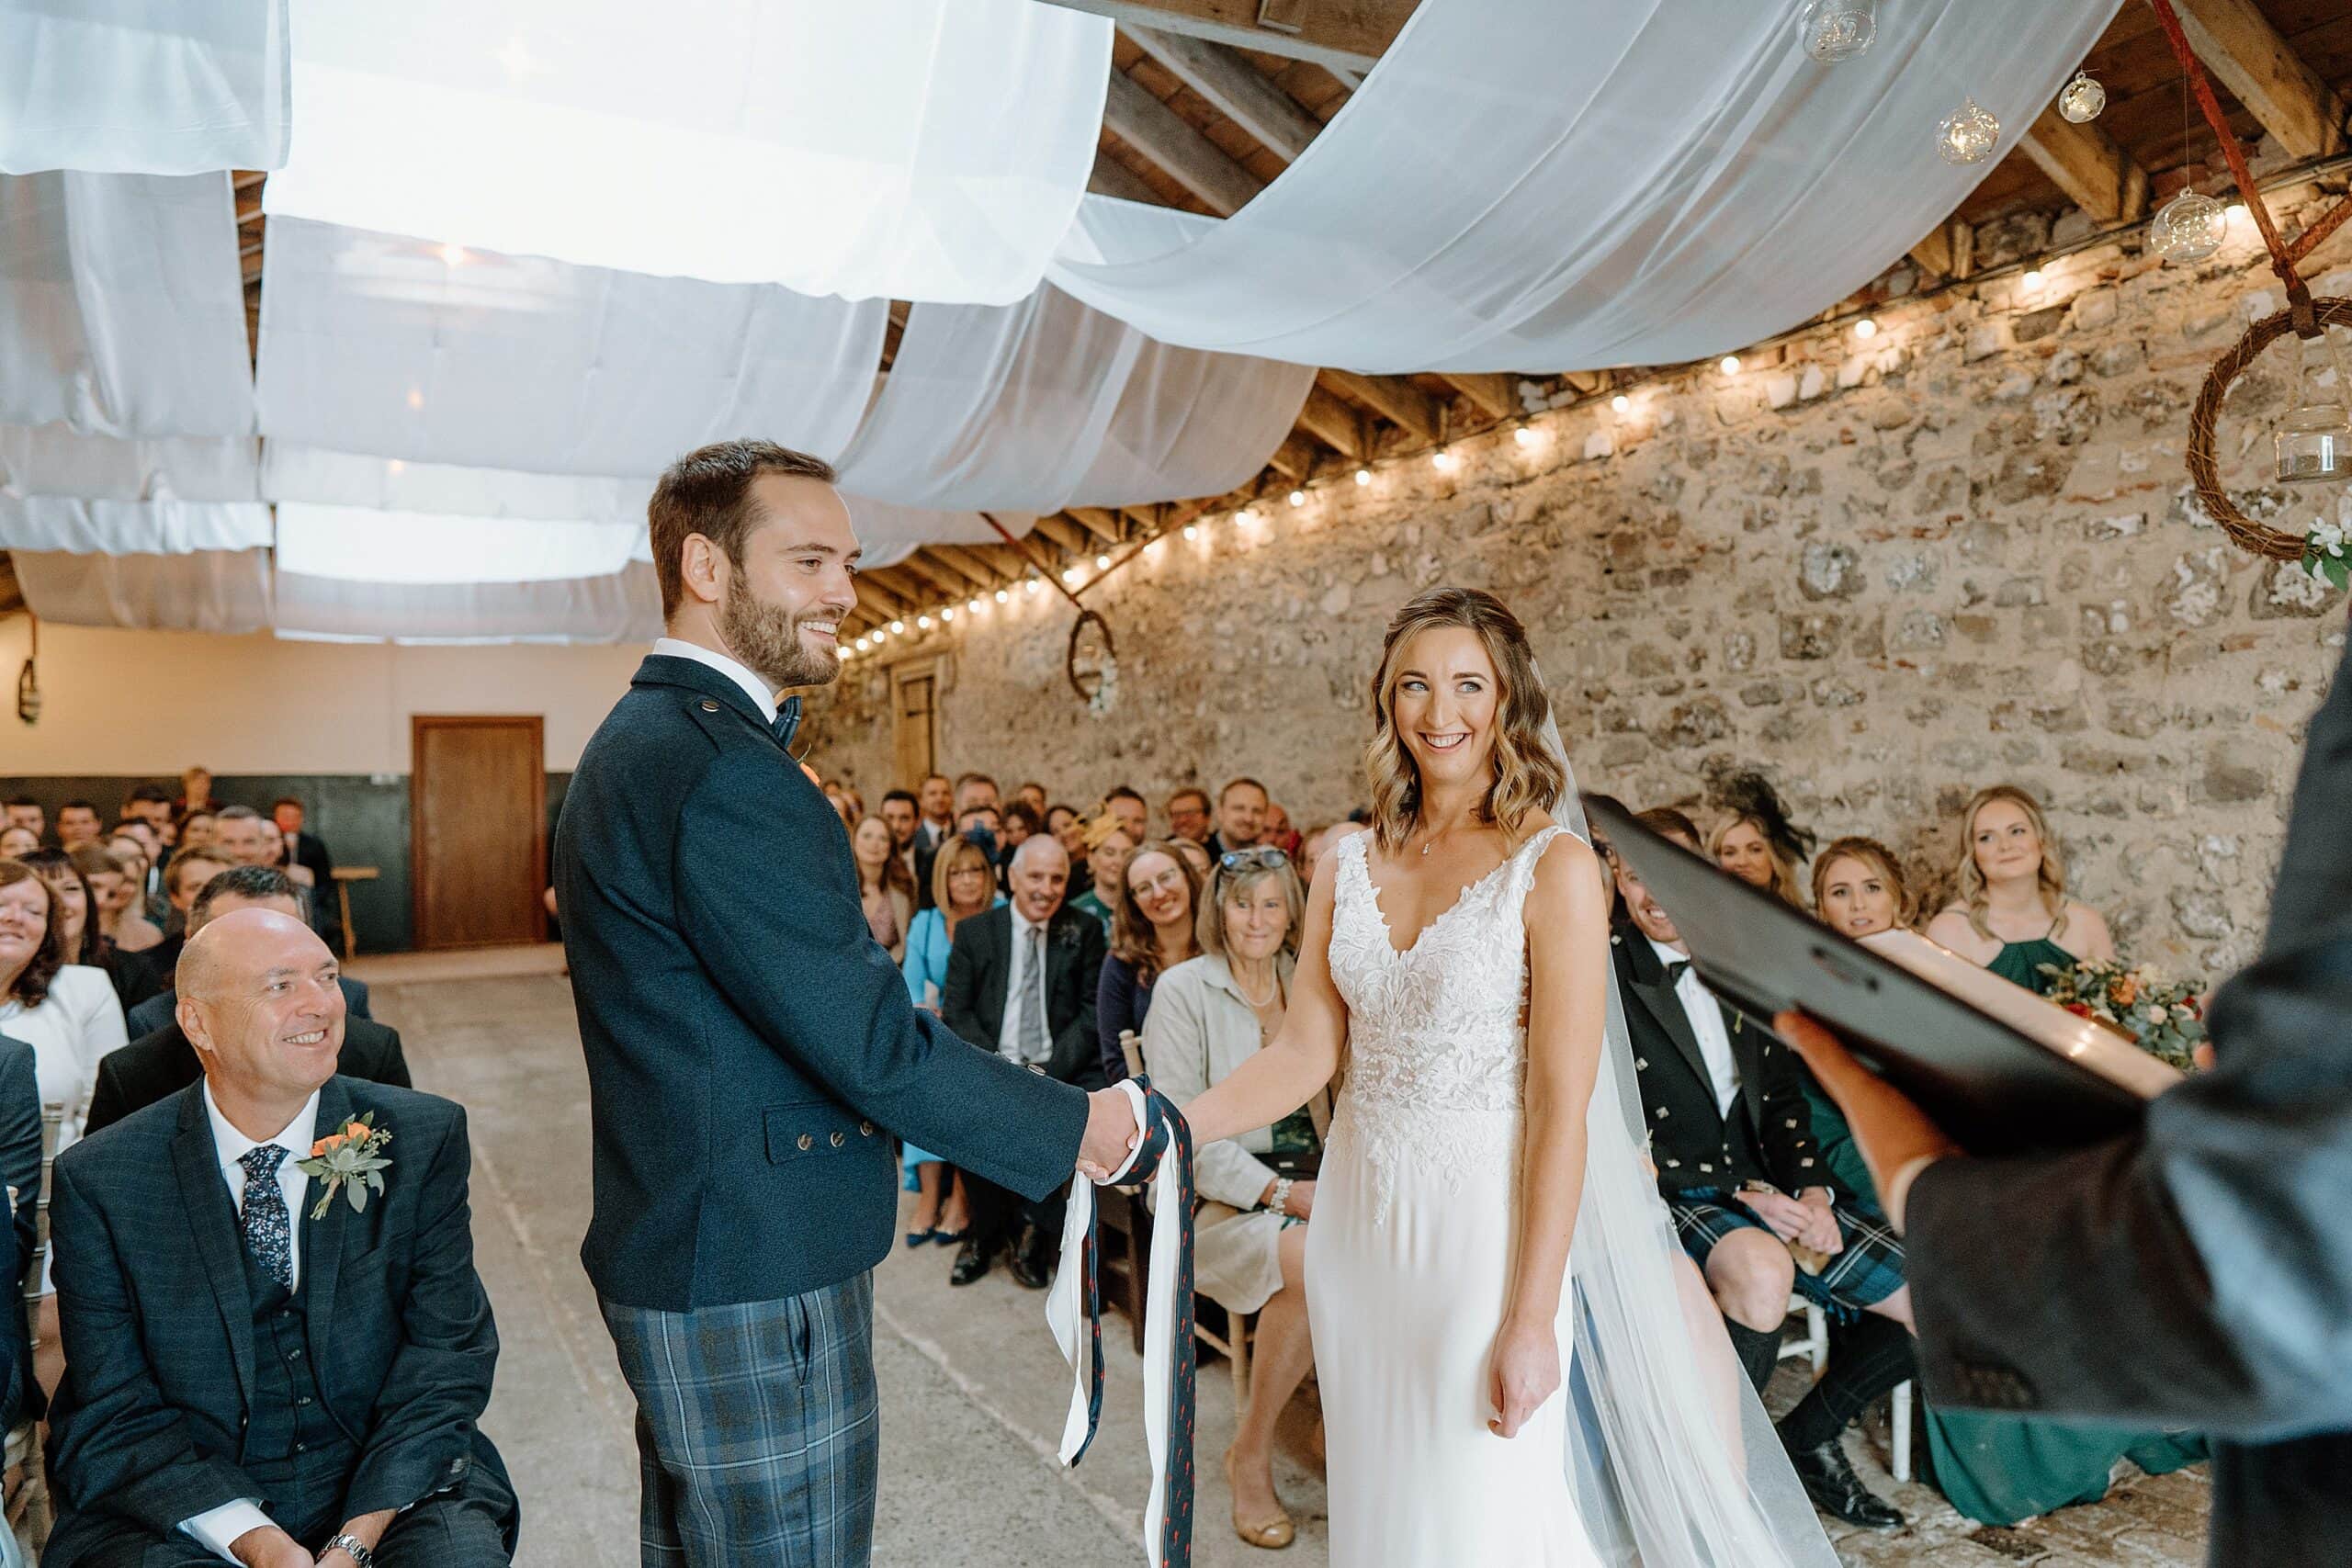 the bride and groom in handfasting ceremony beneath white drapes hanging from the ceiling during wedding ceremony at the wedding byre at harelaw farm wedding barn venue fenwick scotland